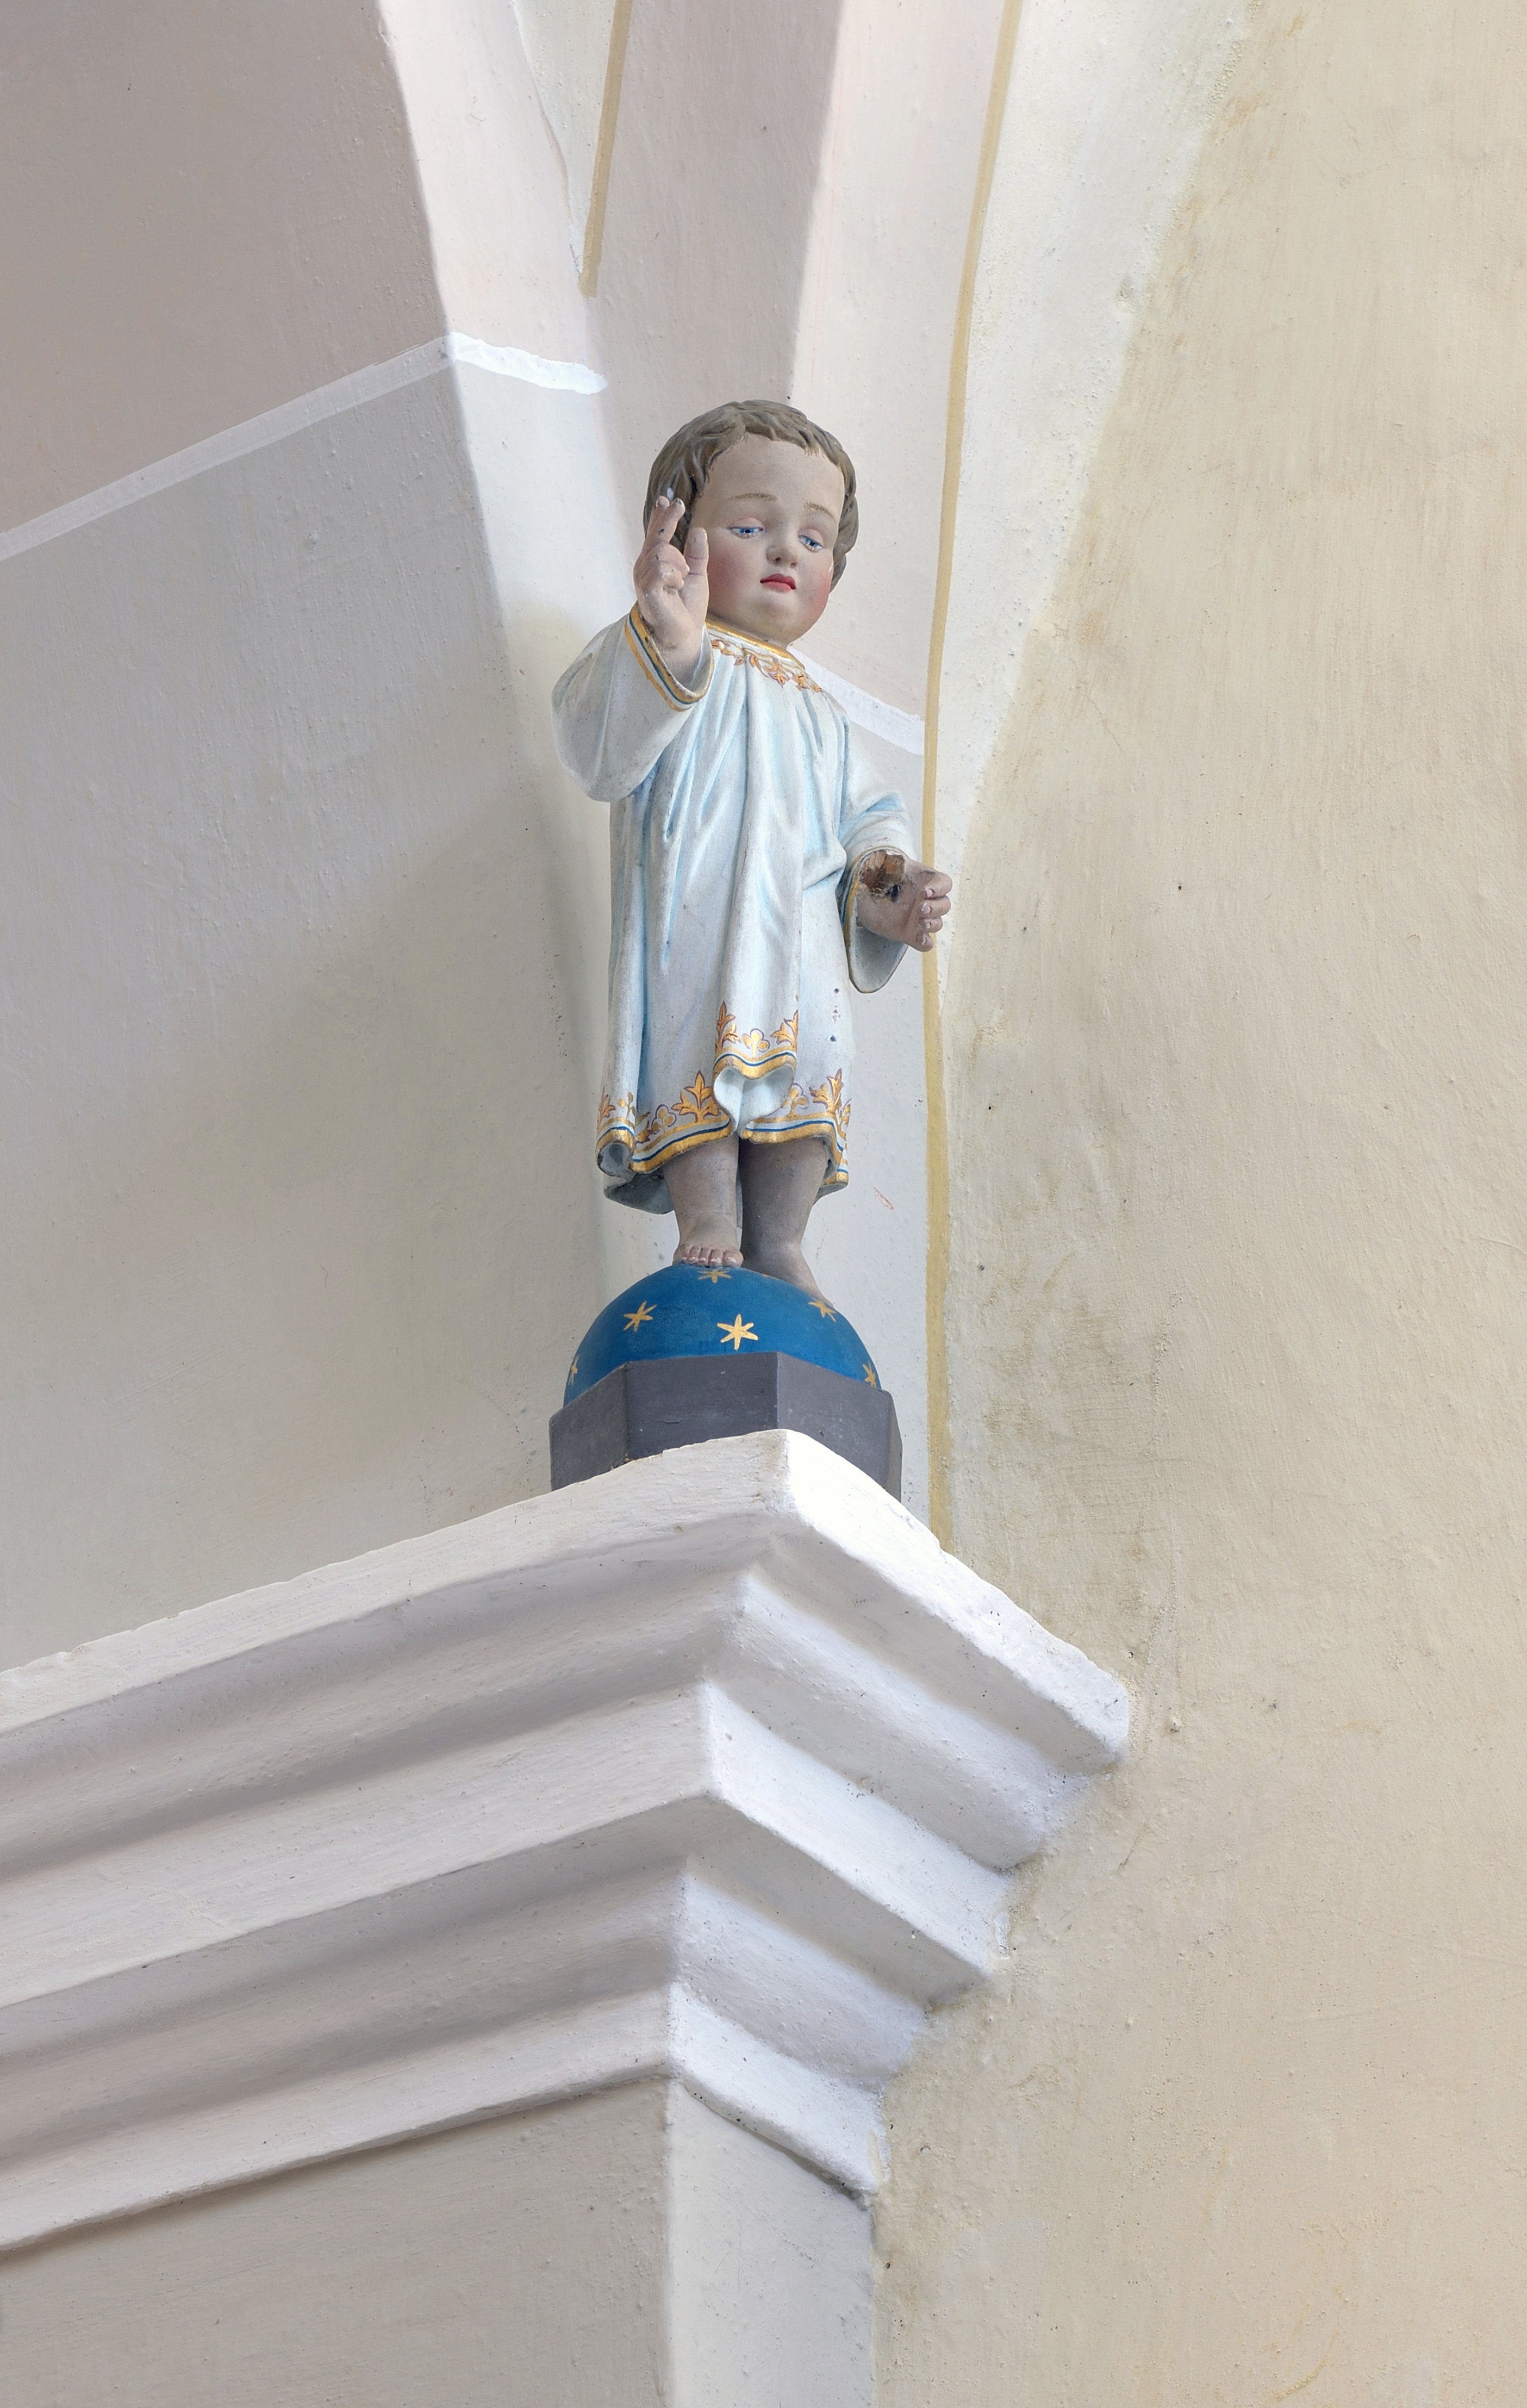 Jesus as a child in the Saint John the Baptist church in Freins